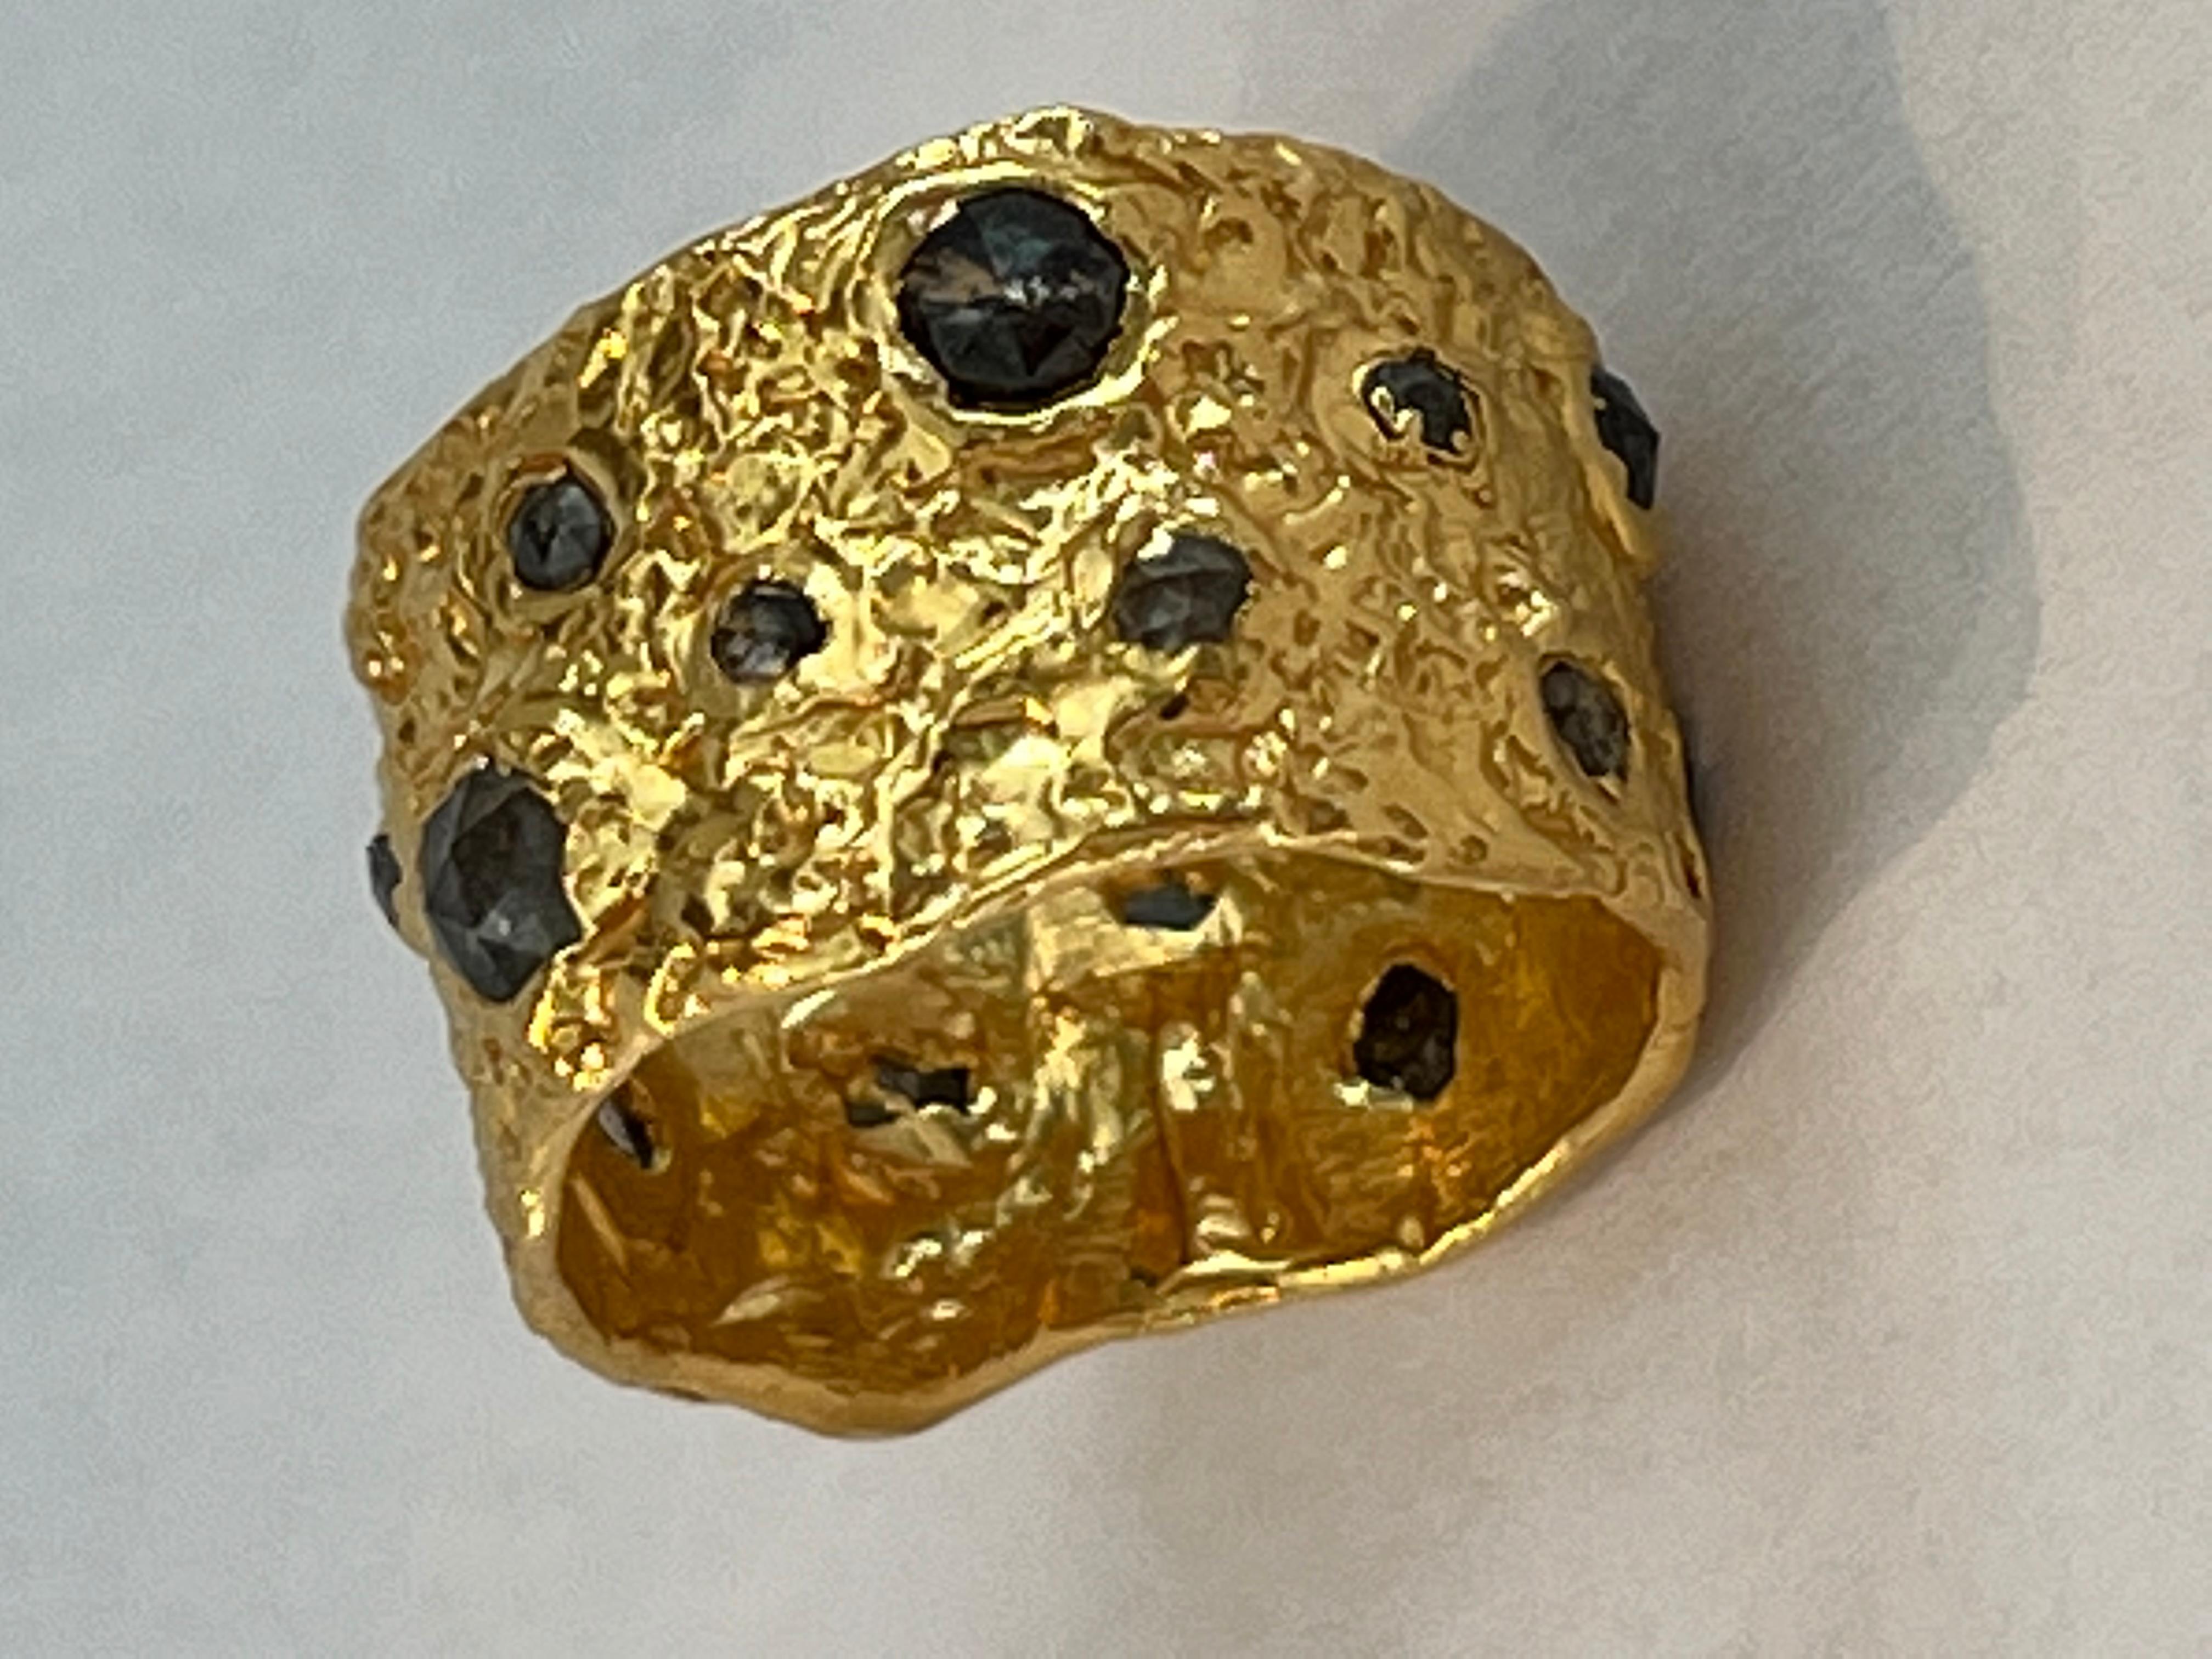 Artemis 22k gold ring features salt and pepper diamonds organically set throughout the ring. Hand made, one of a kind and complete with Tagili Designs signature finish. Part of the Goddess Collection. This collection combines the essence of a woman